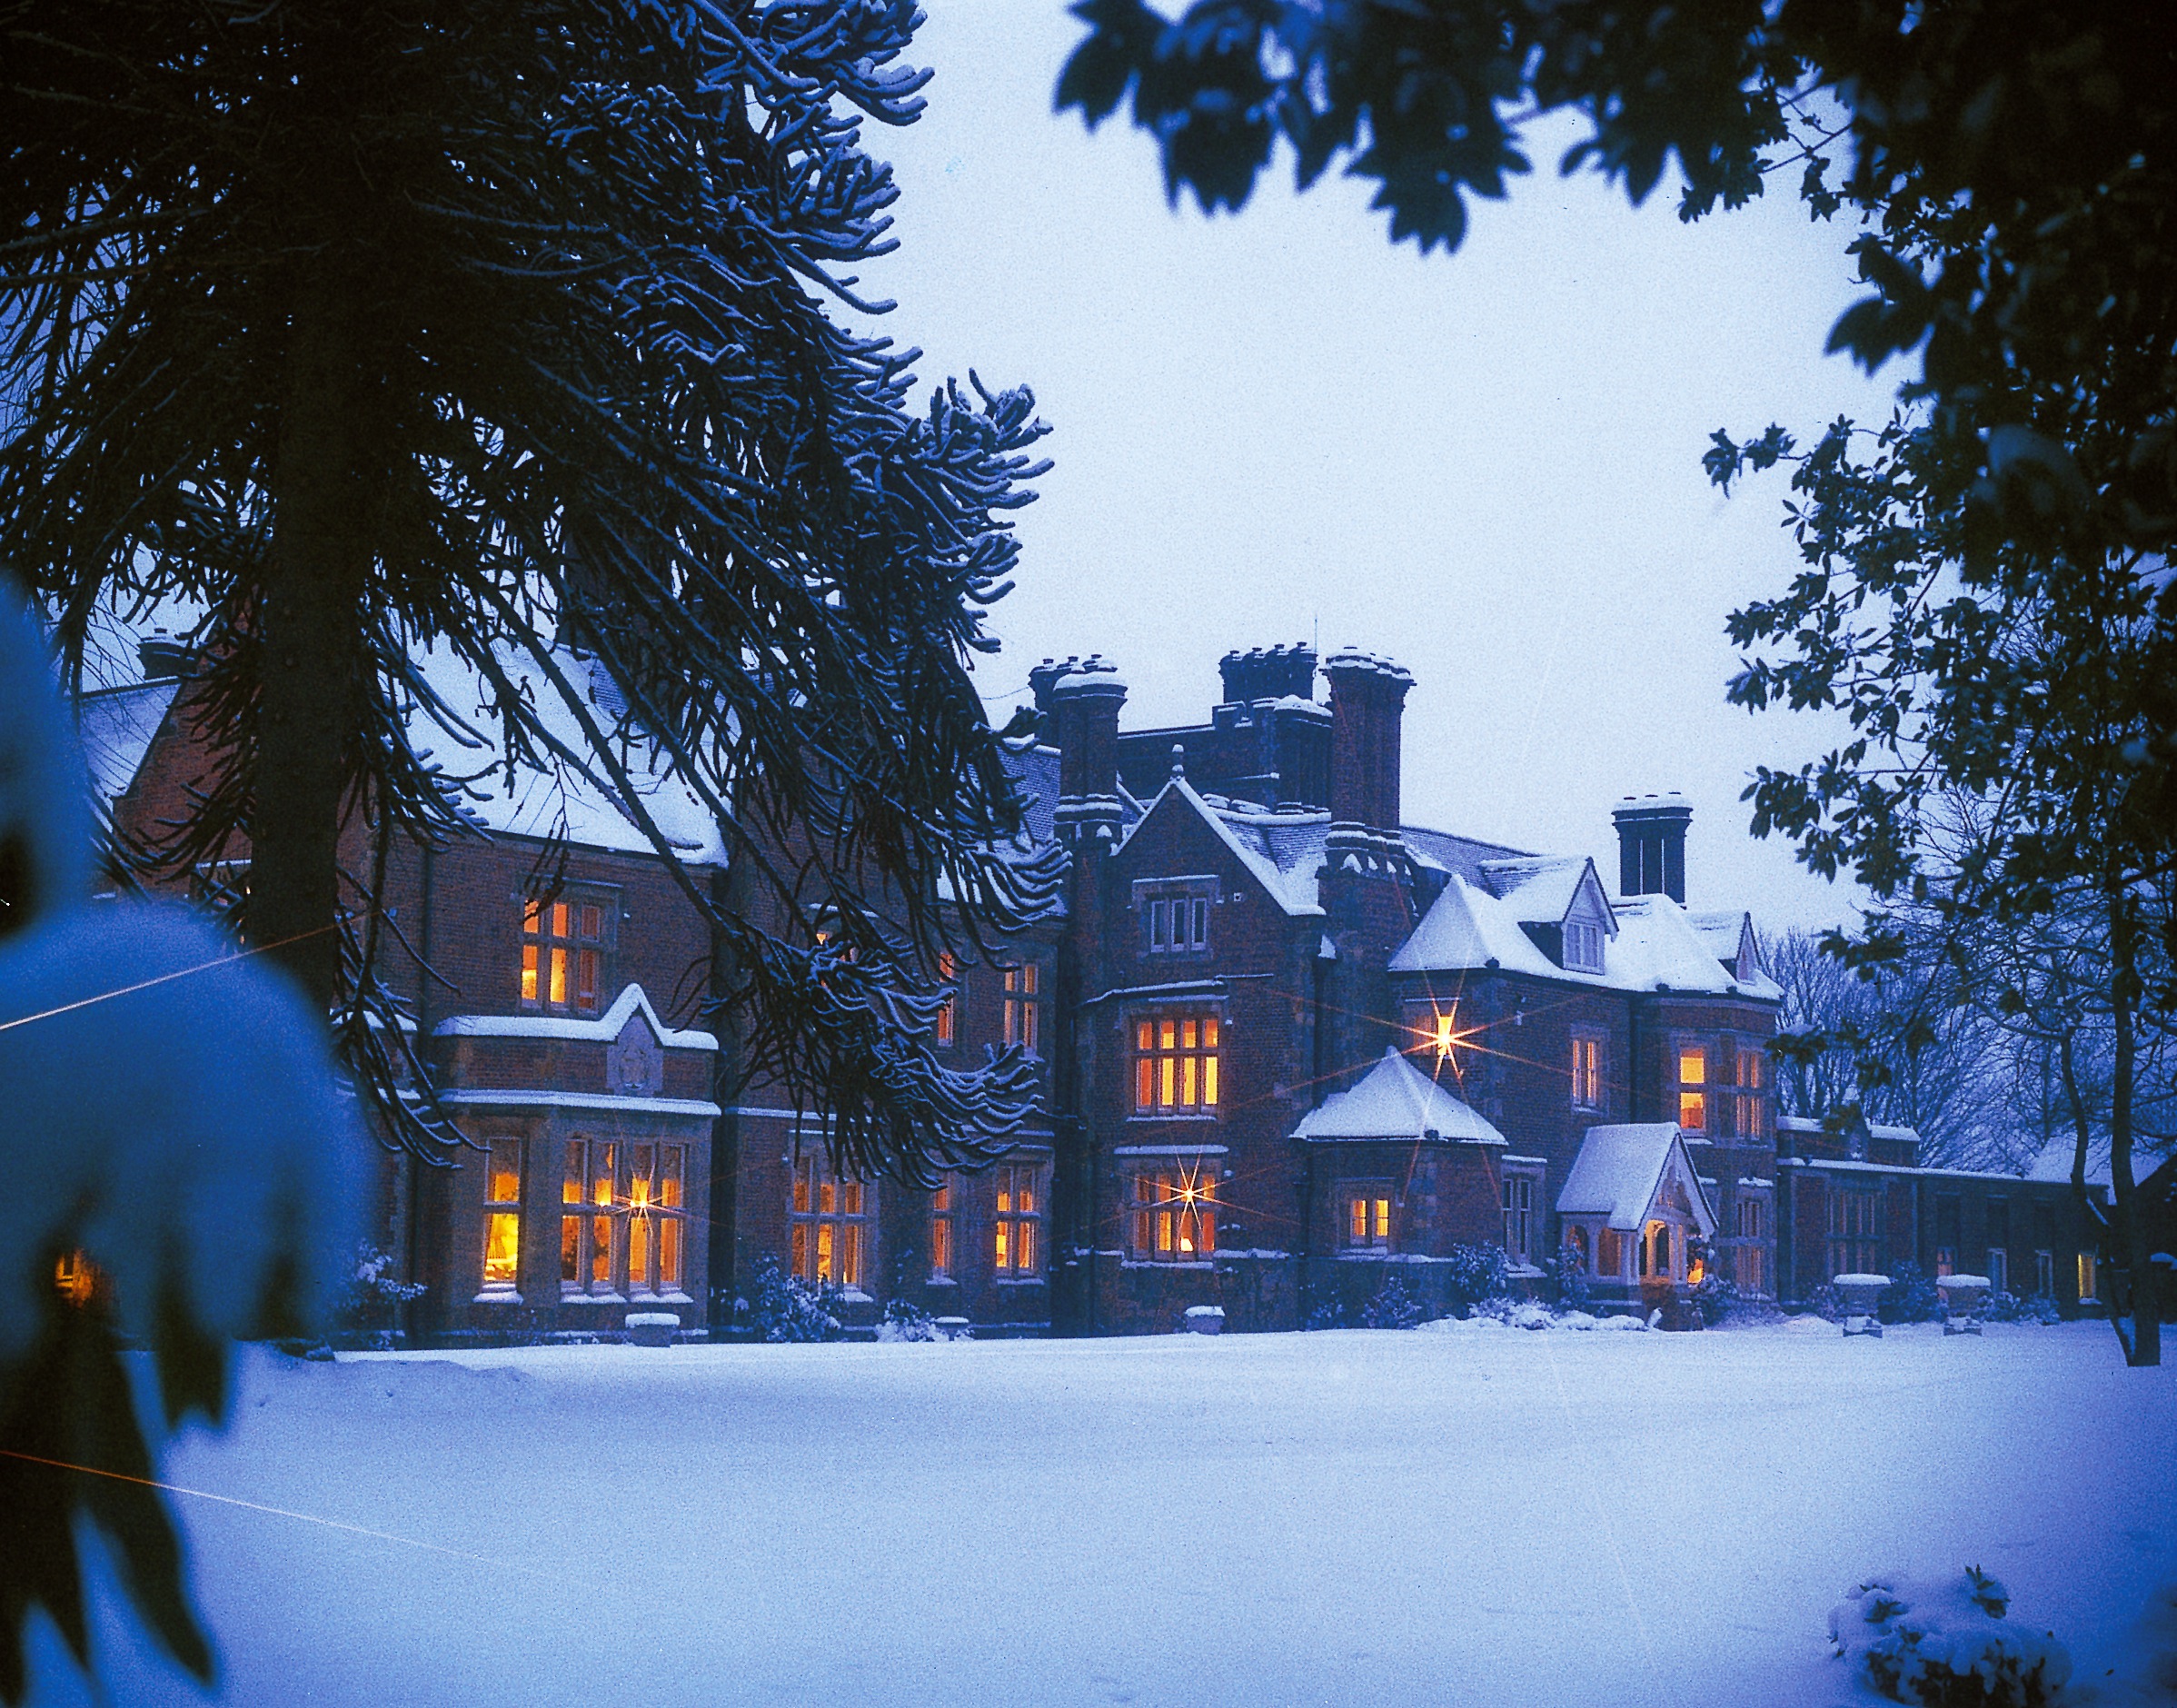 Exterior of Alexander House Hotel in the Snow